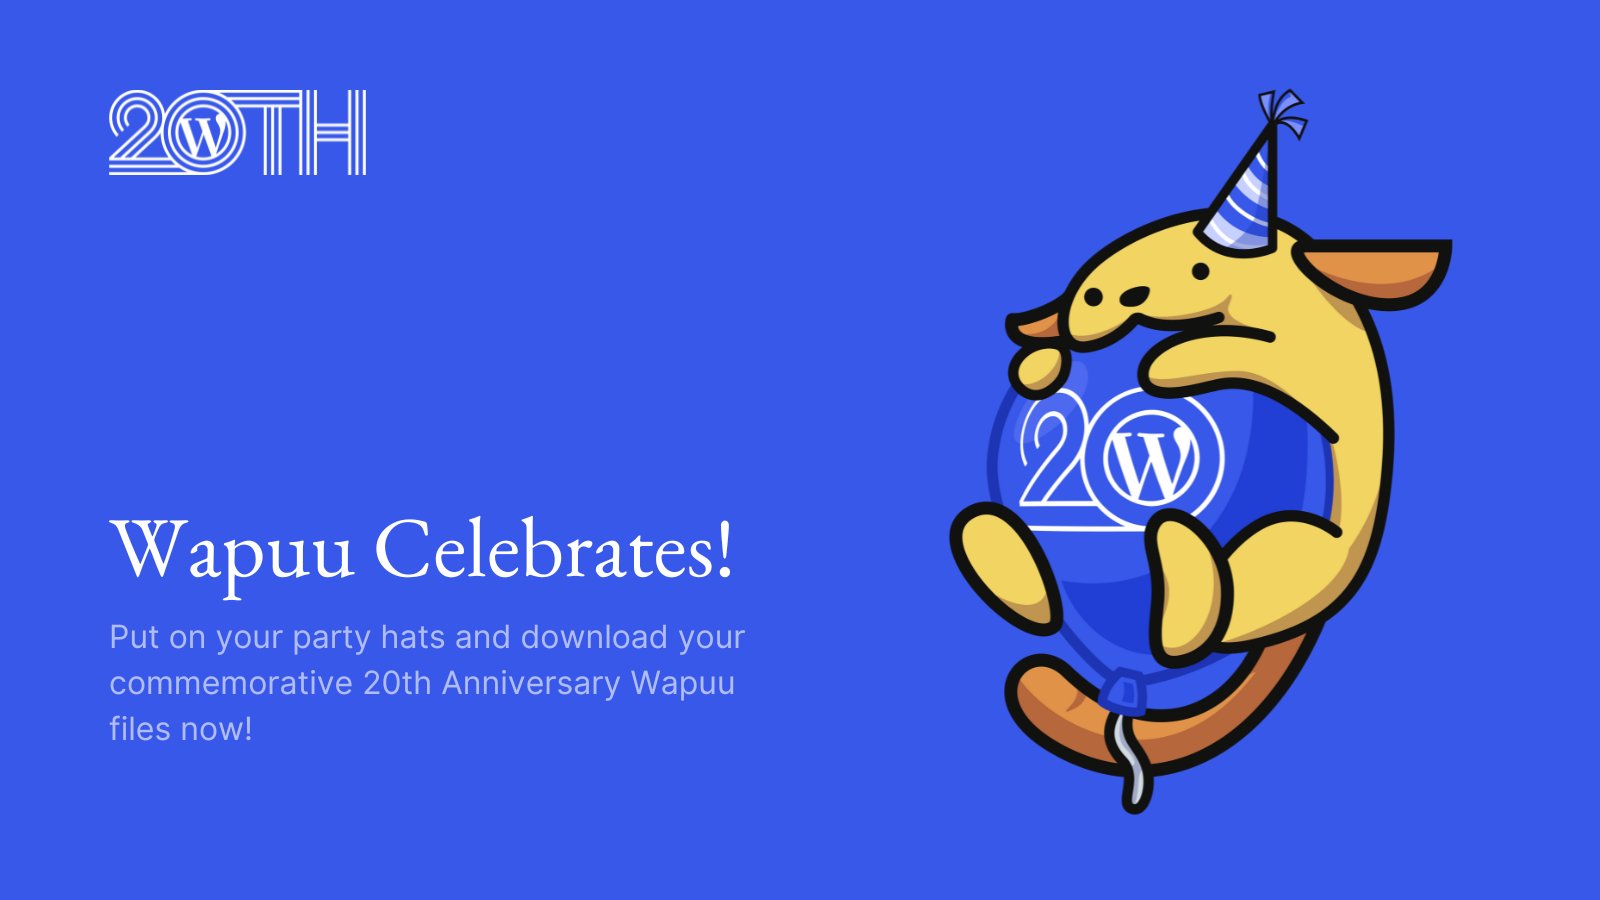 Blue background with image of WordPress mascot, Wapuu. Text: "Wapuu celebrates! Put on your party hats and download your commemorative 20th anniversary Wapuu files now!)